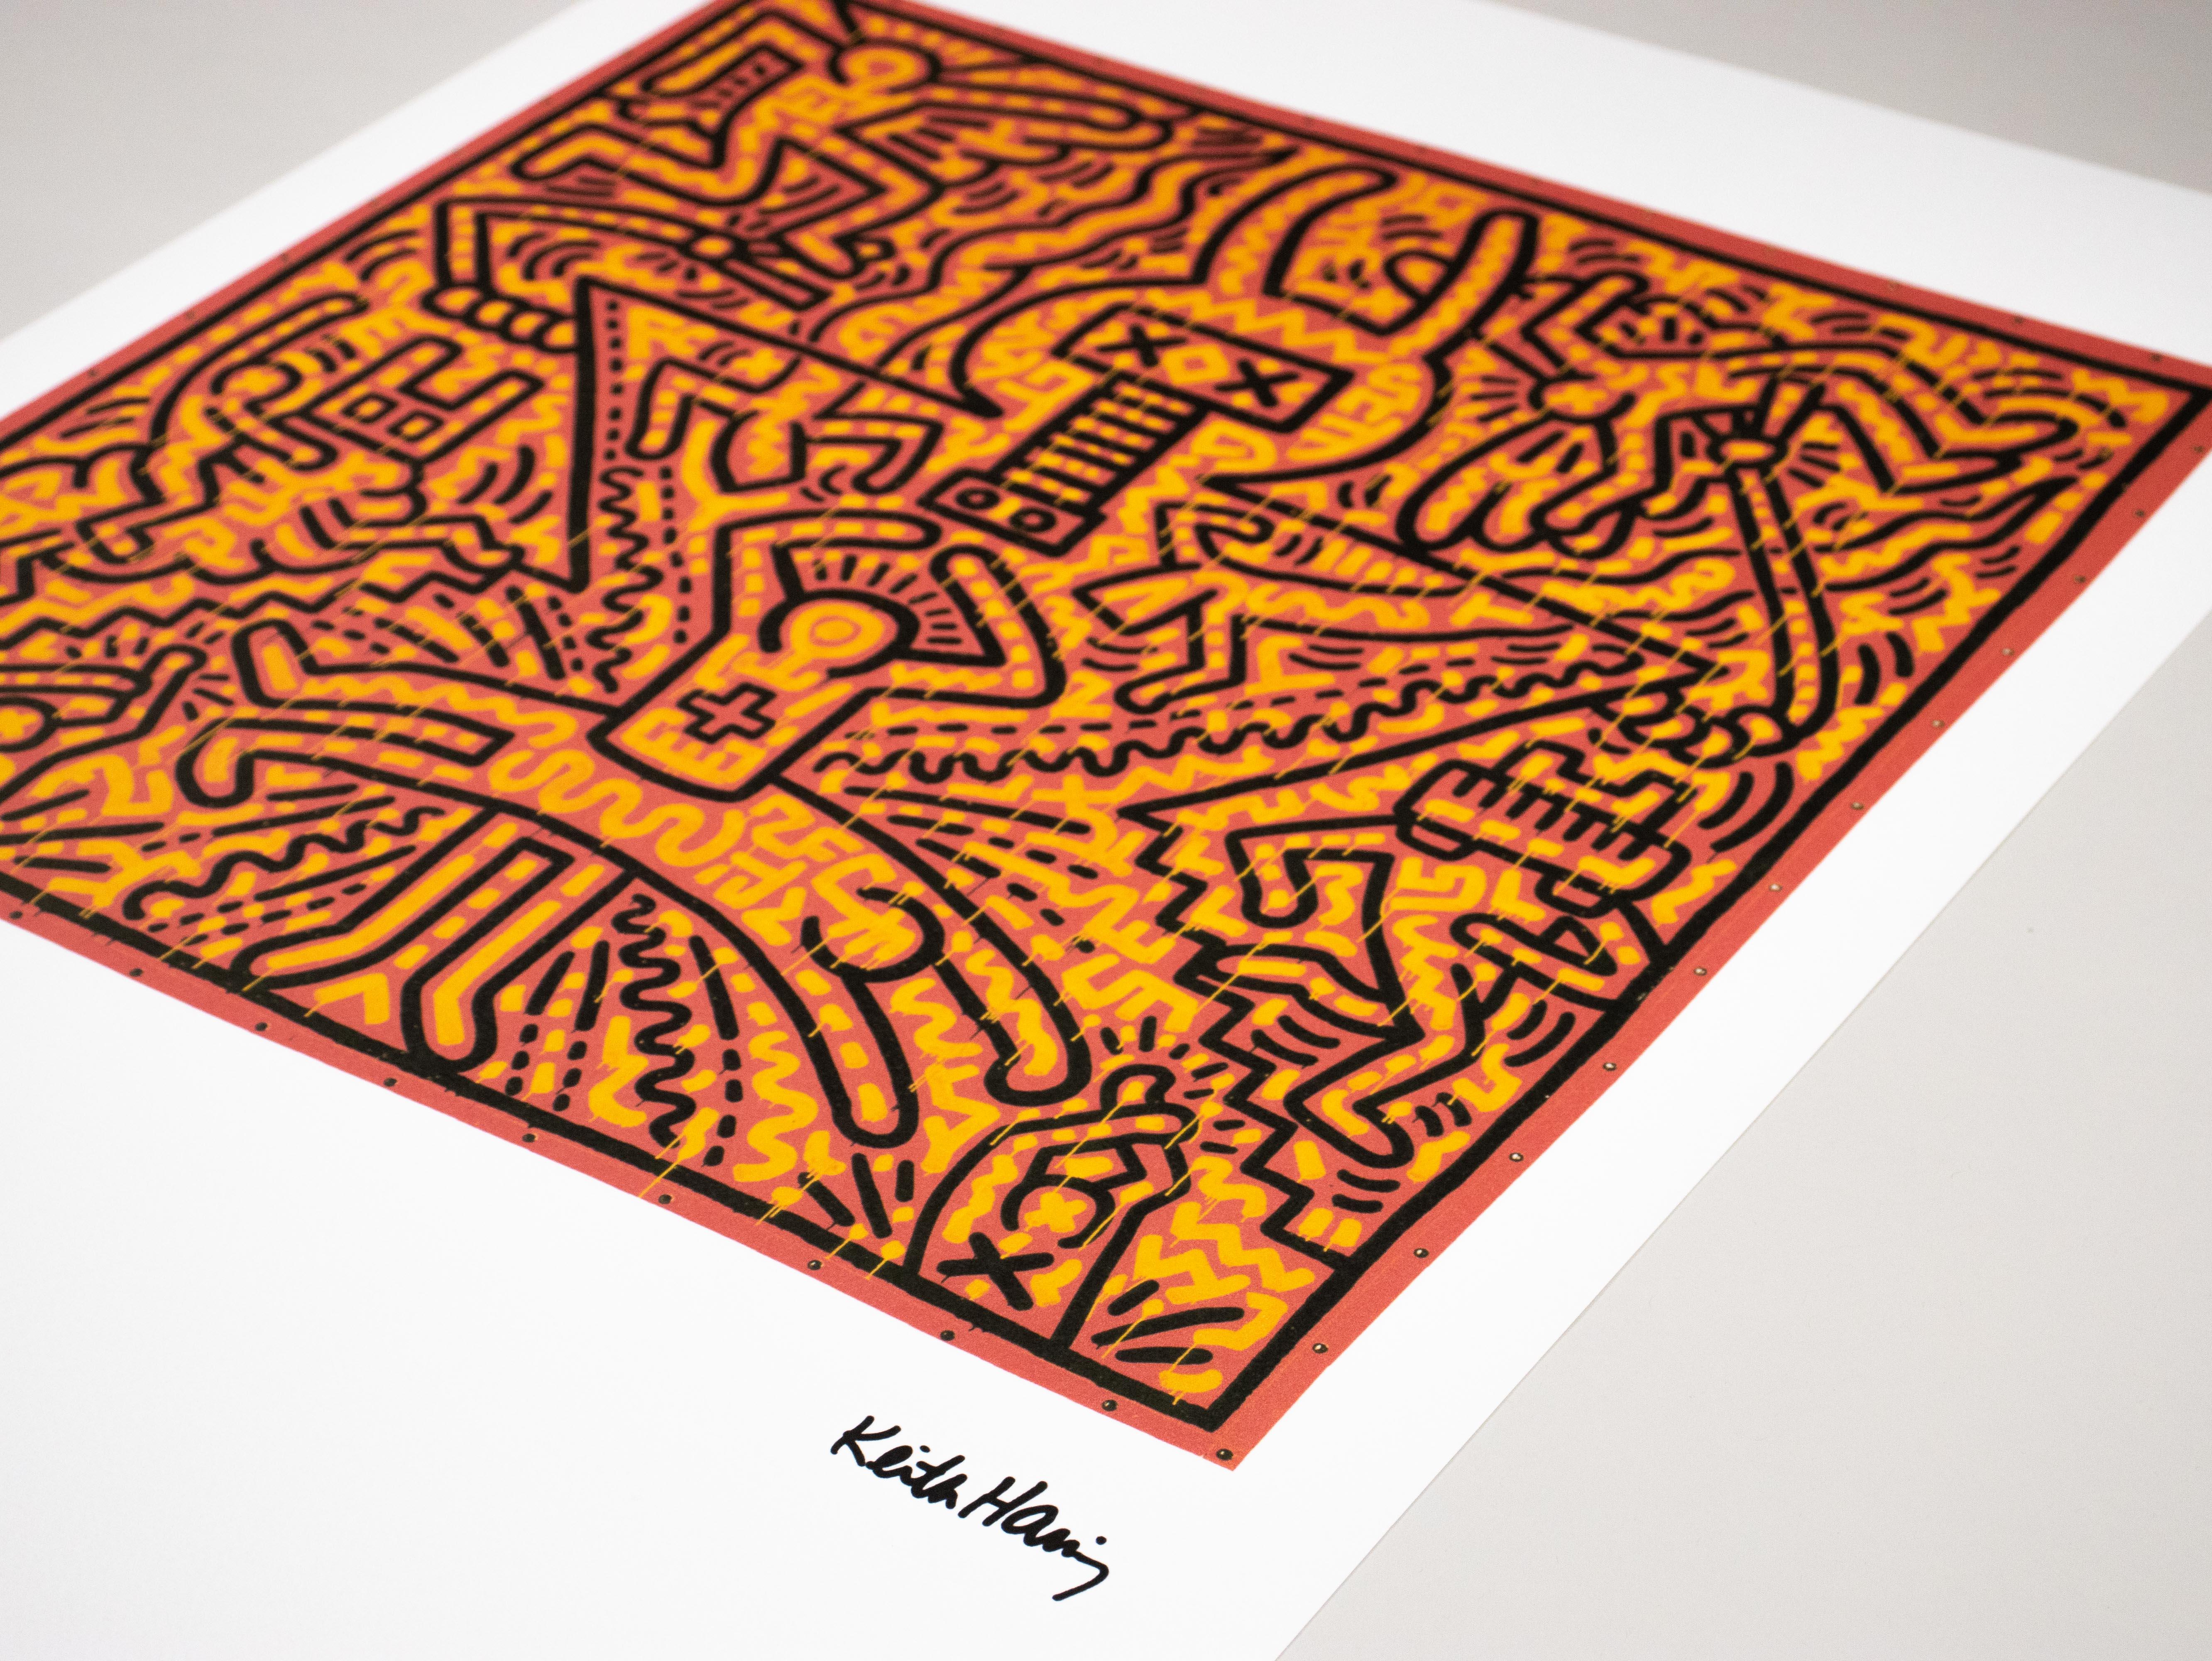 Lithograph - Limited Edition 71/150 - Keith Haring Foundation Inc. For Sale 5